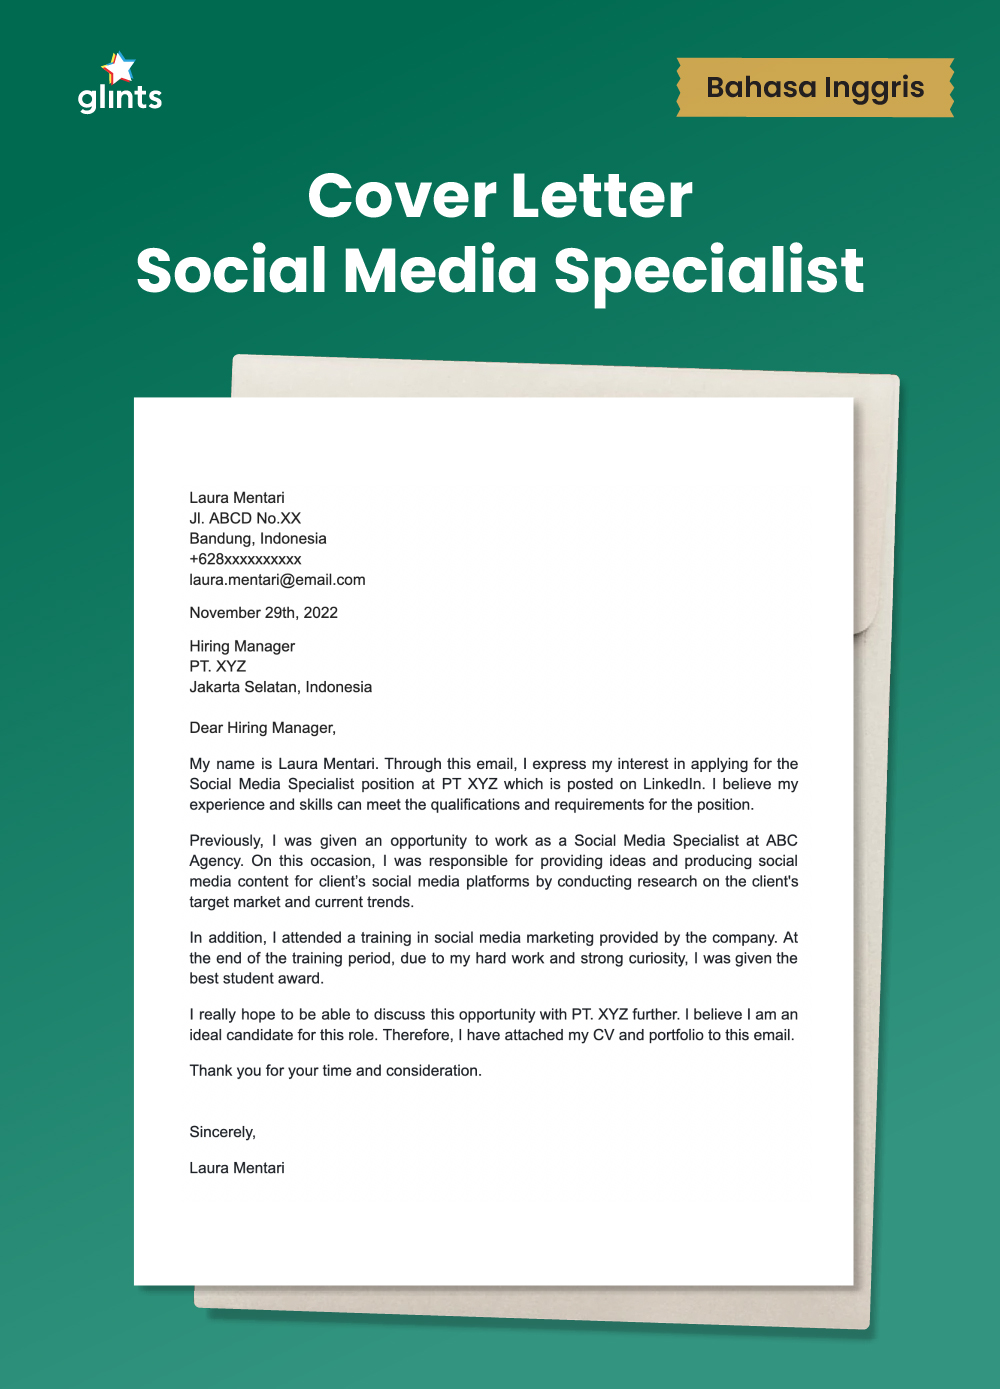 how to write a cover letter for media specialist